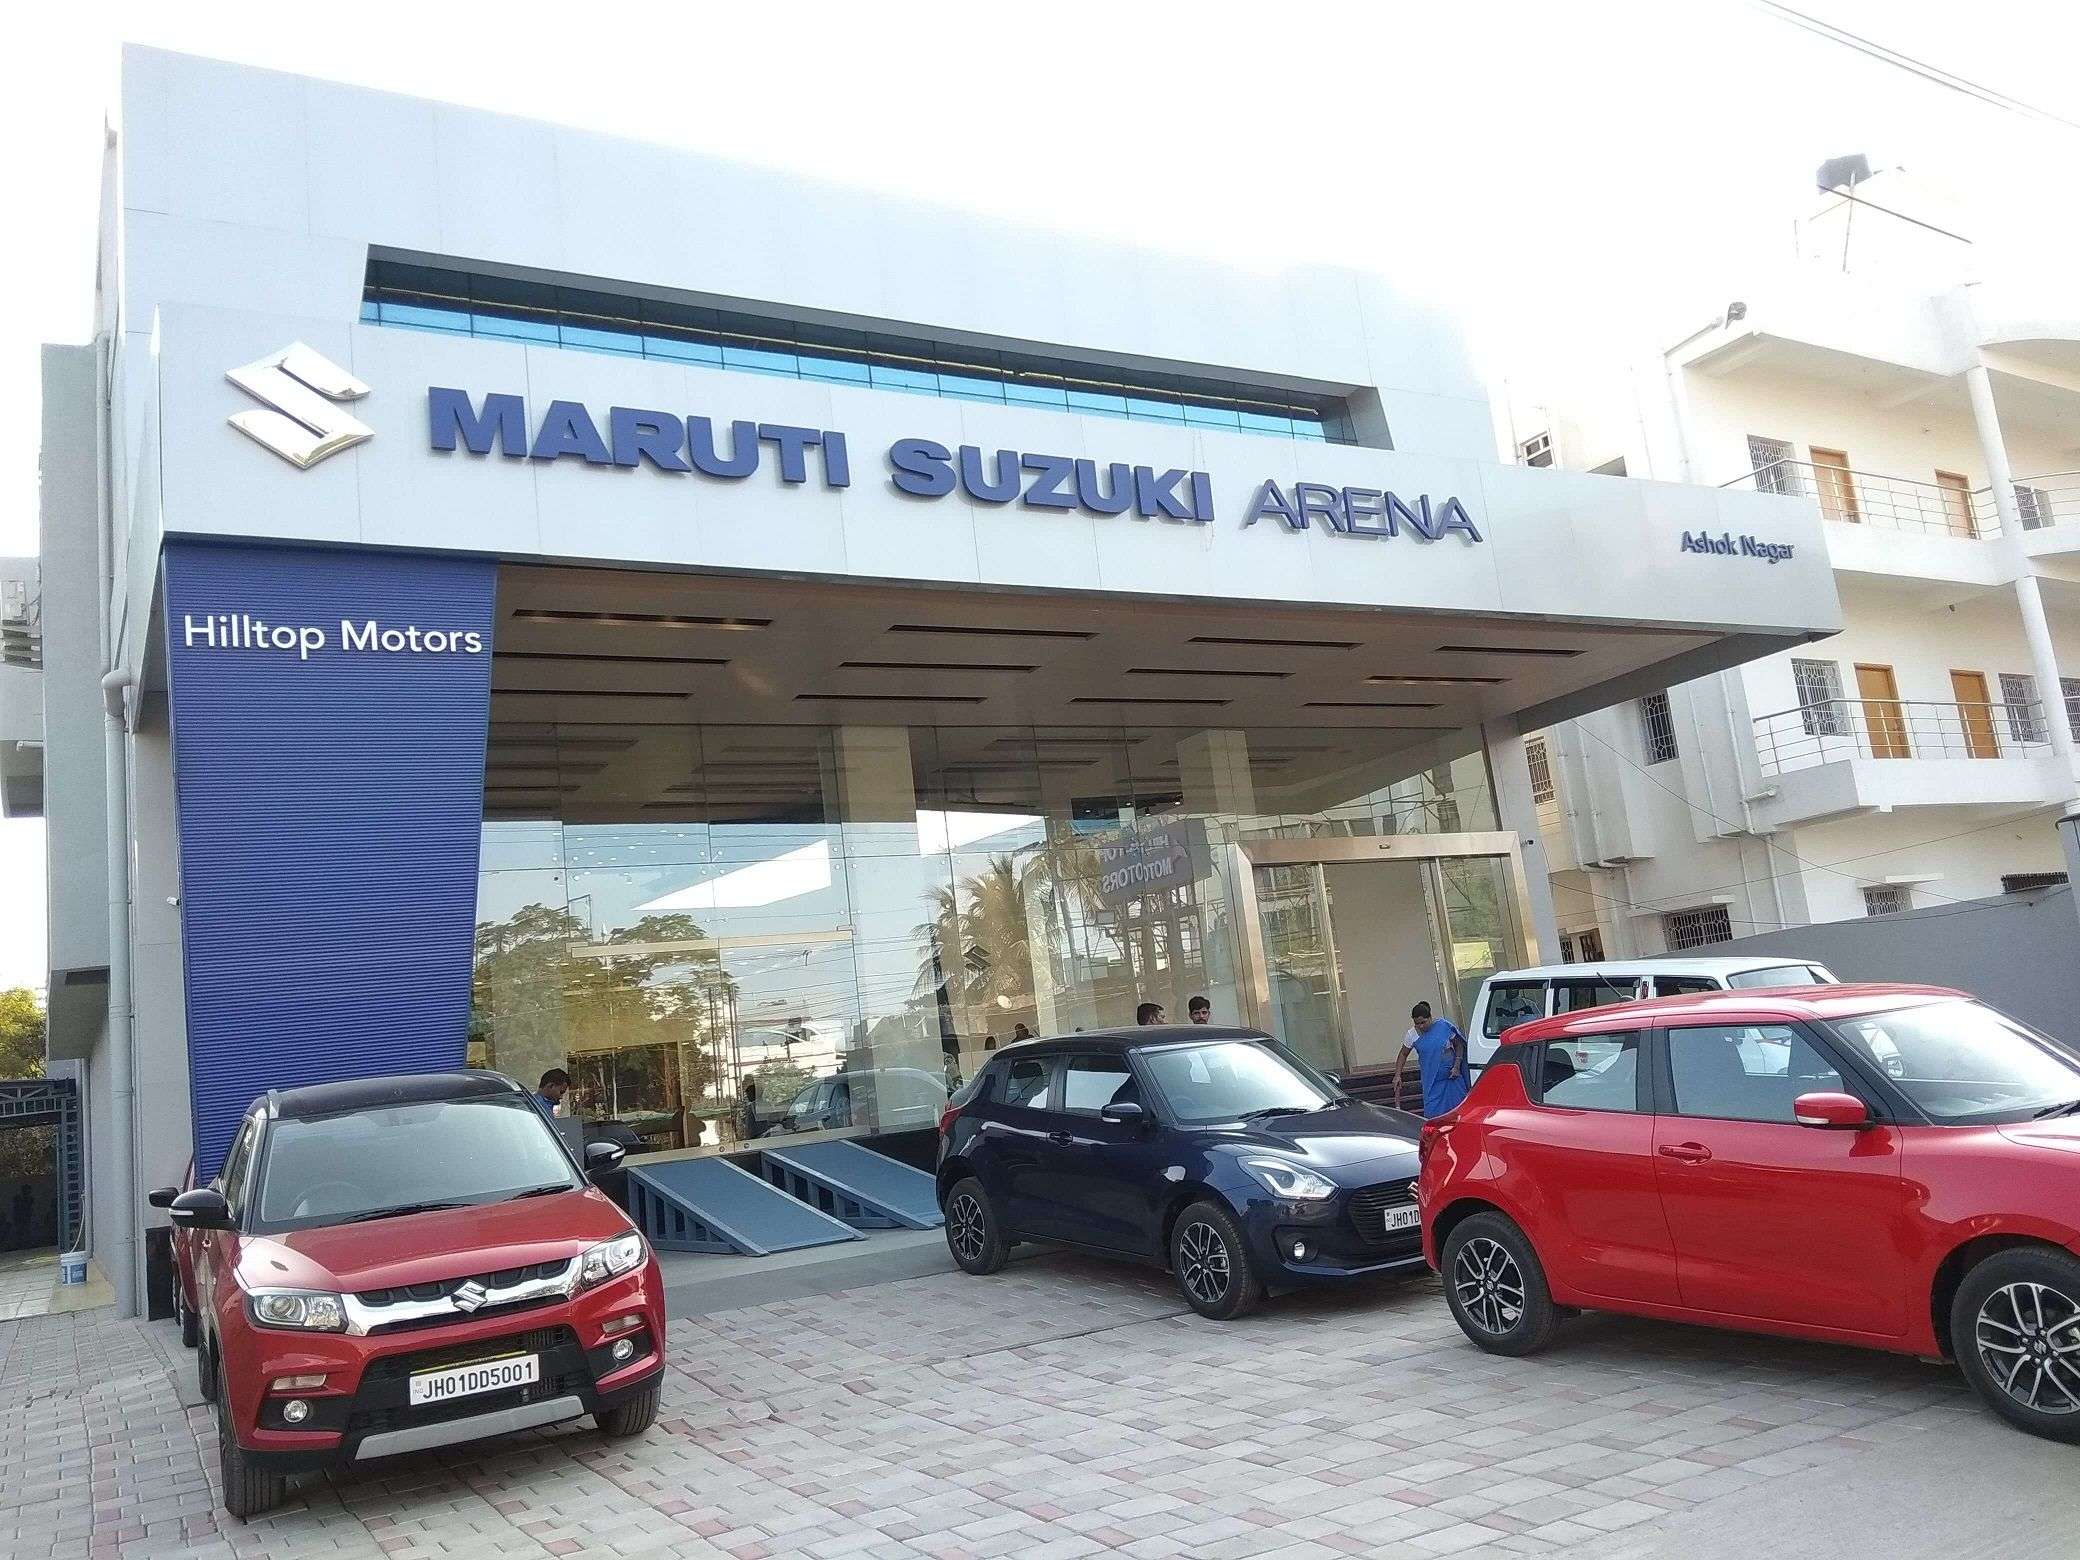 For 4th straight year, Maruti sells one in two passenger vehicles in India